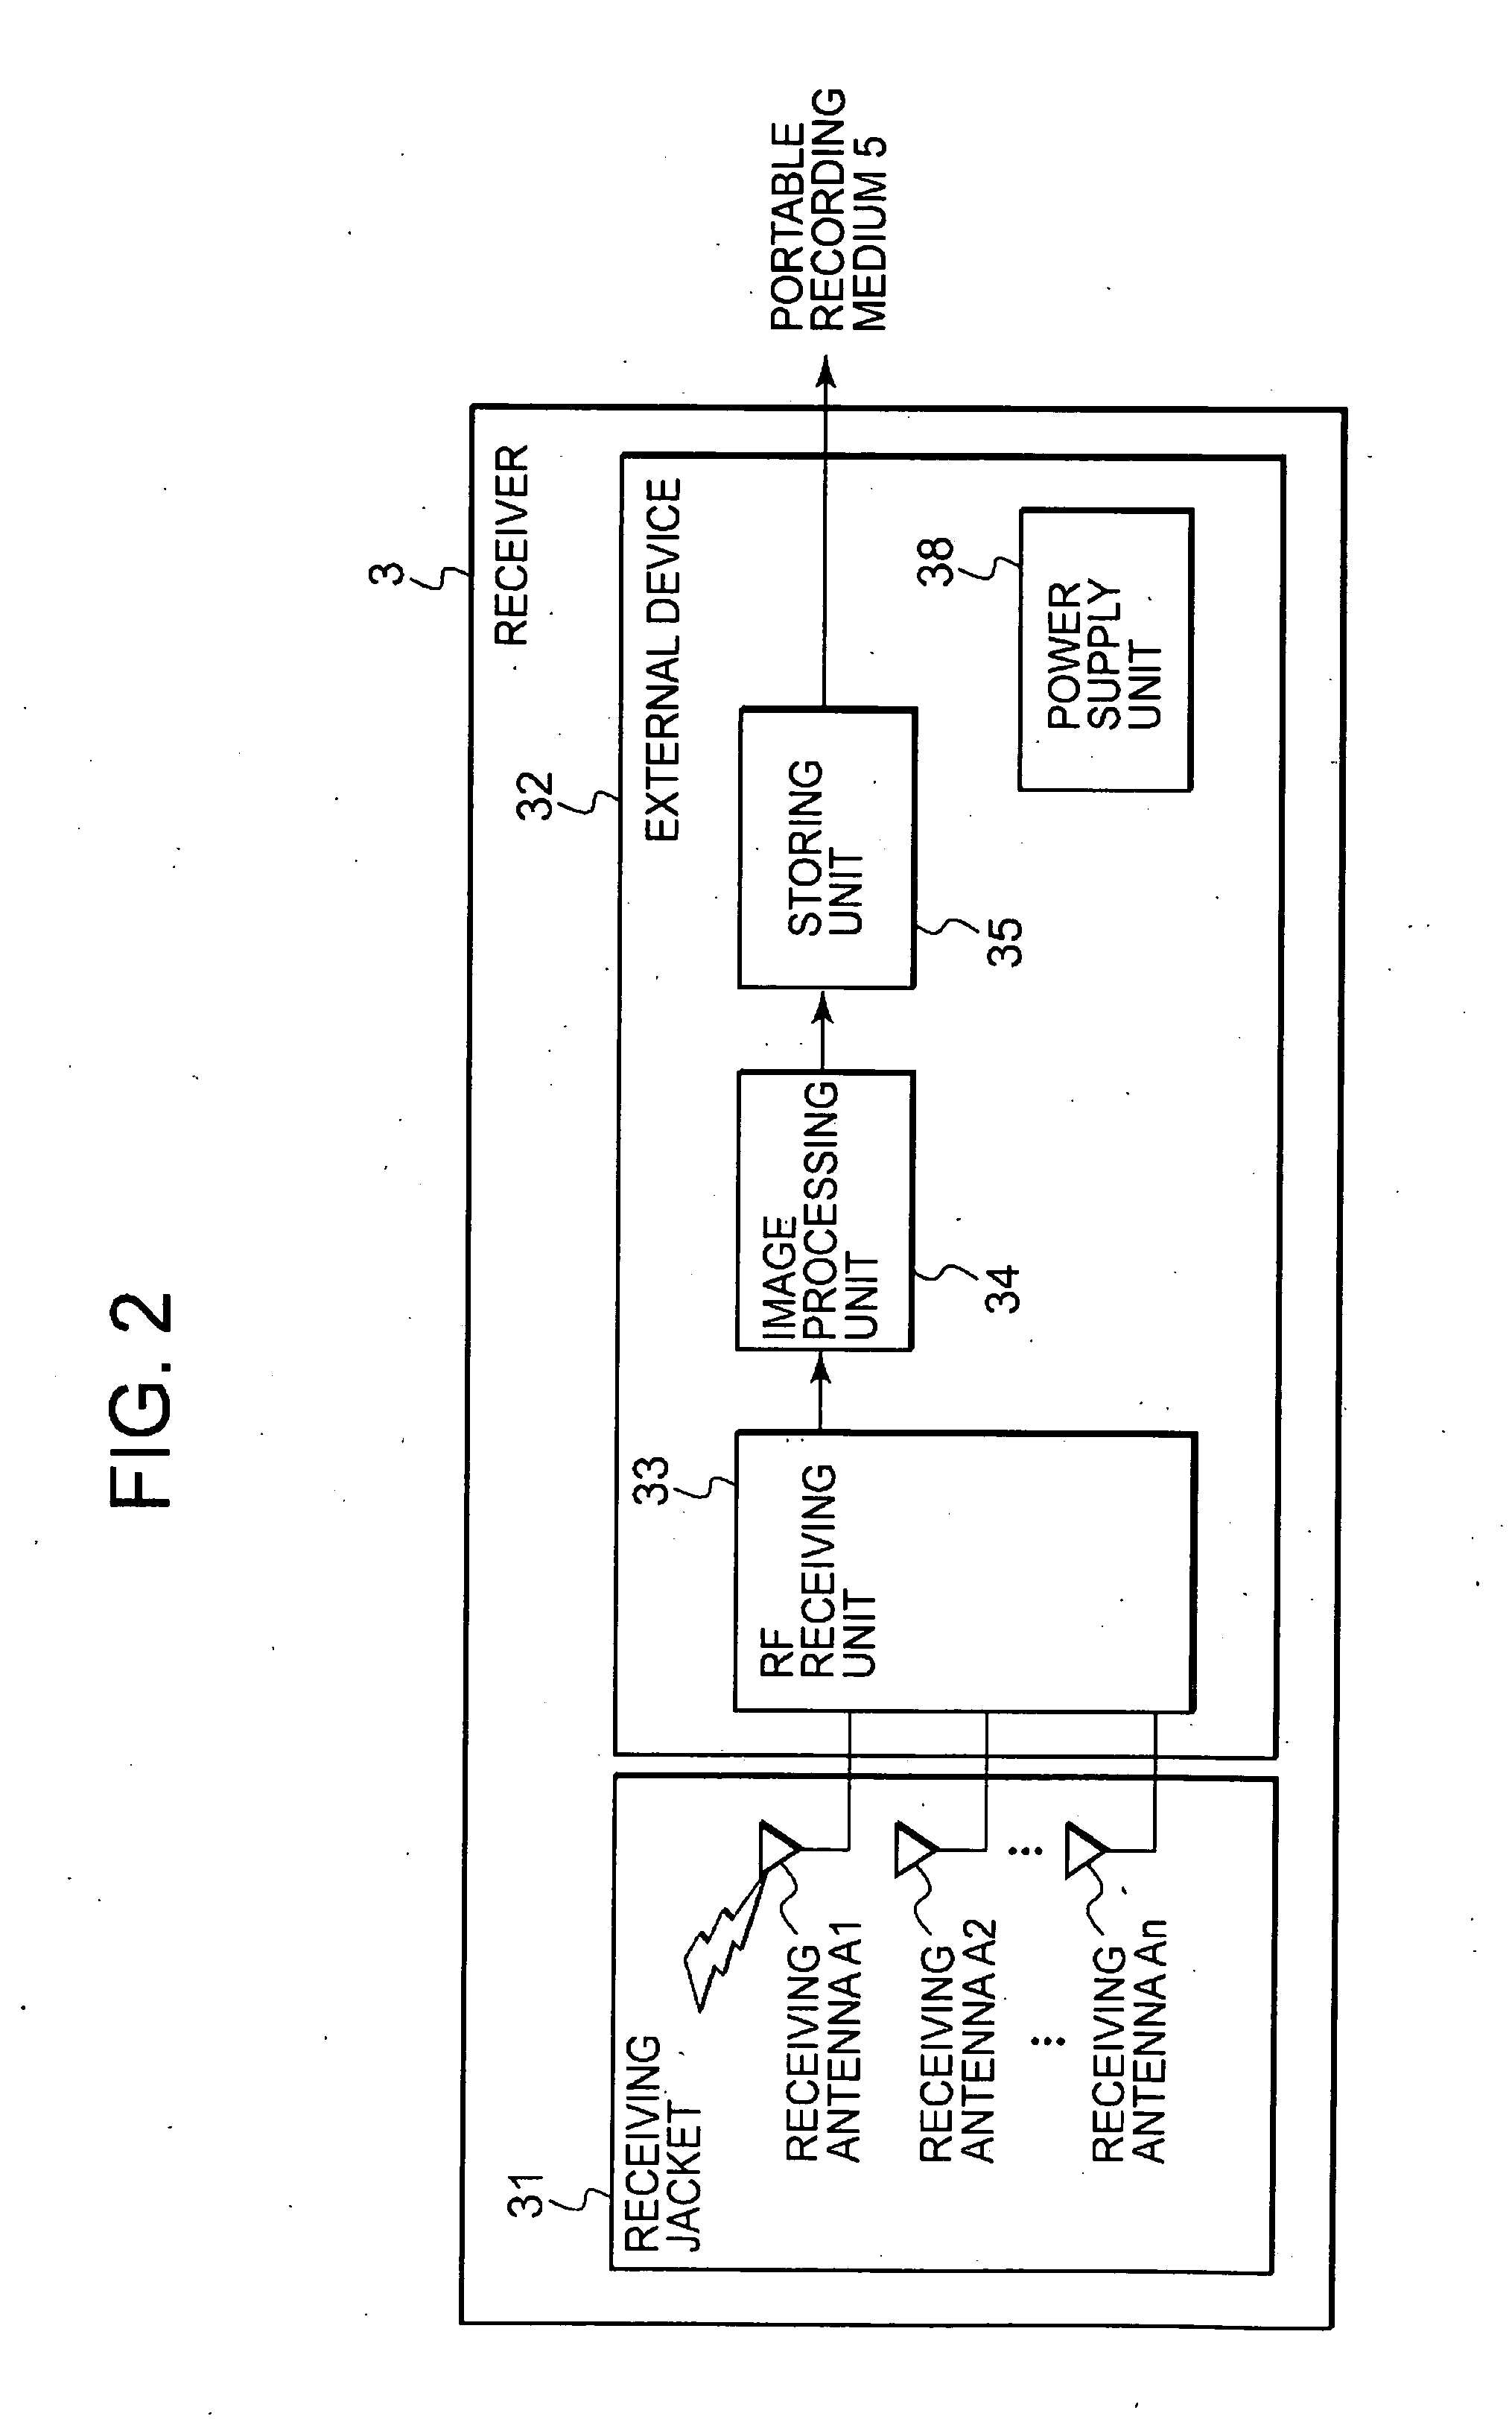 Intrabody introduced device and medical device